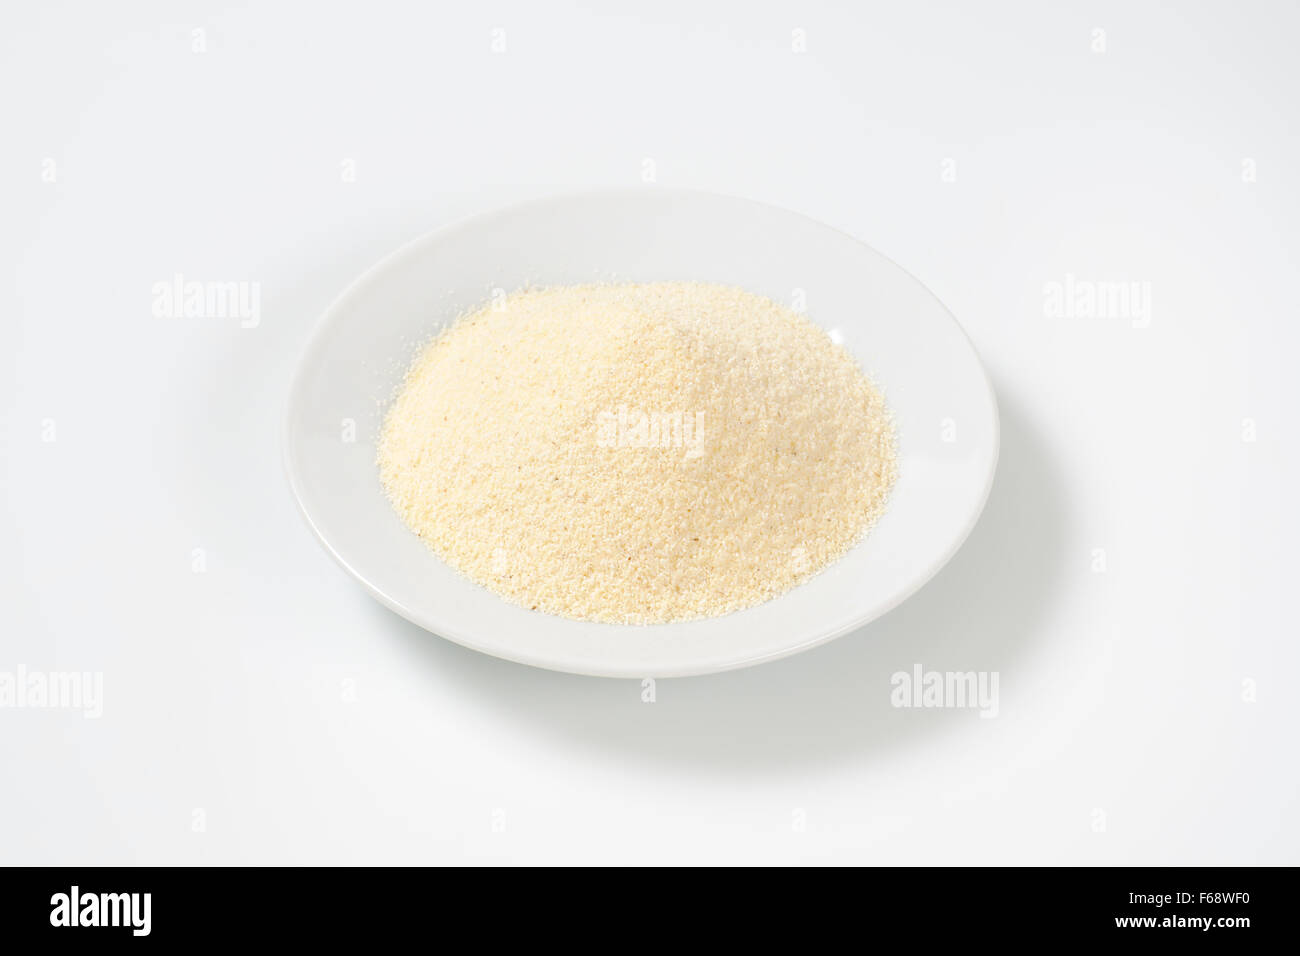 plate of grits on white background Stock Photo